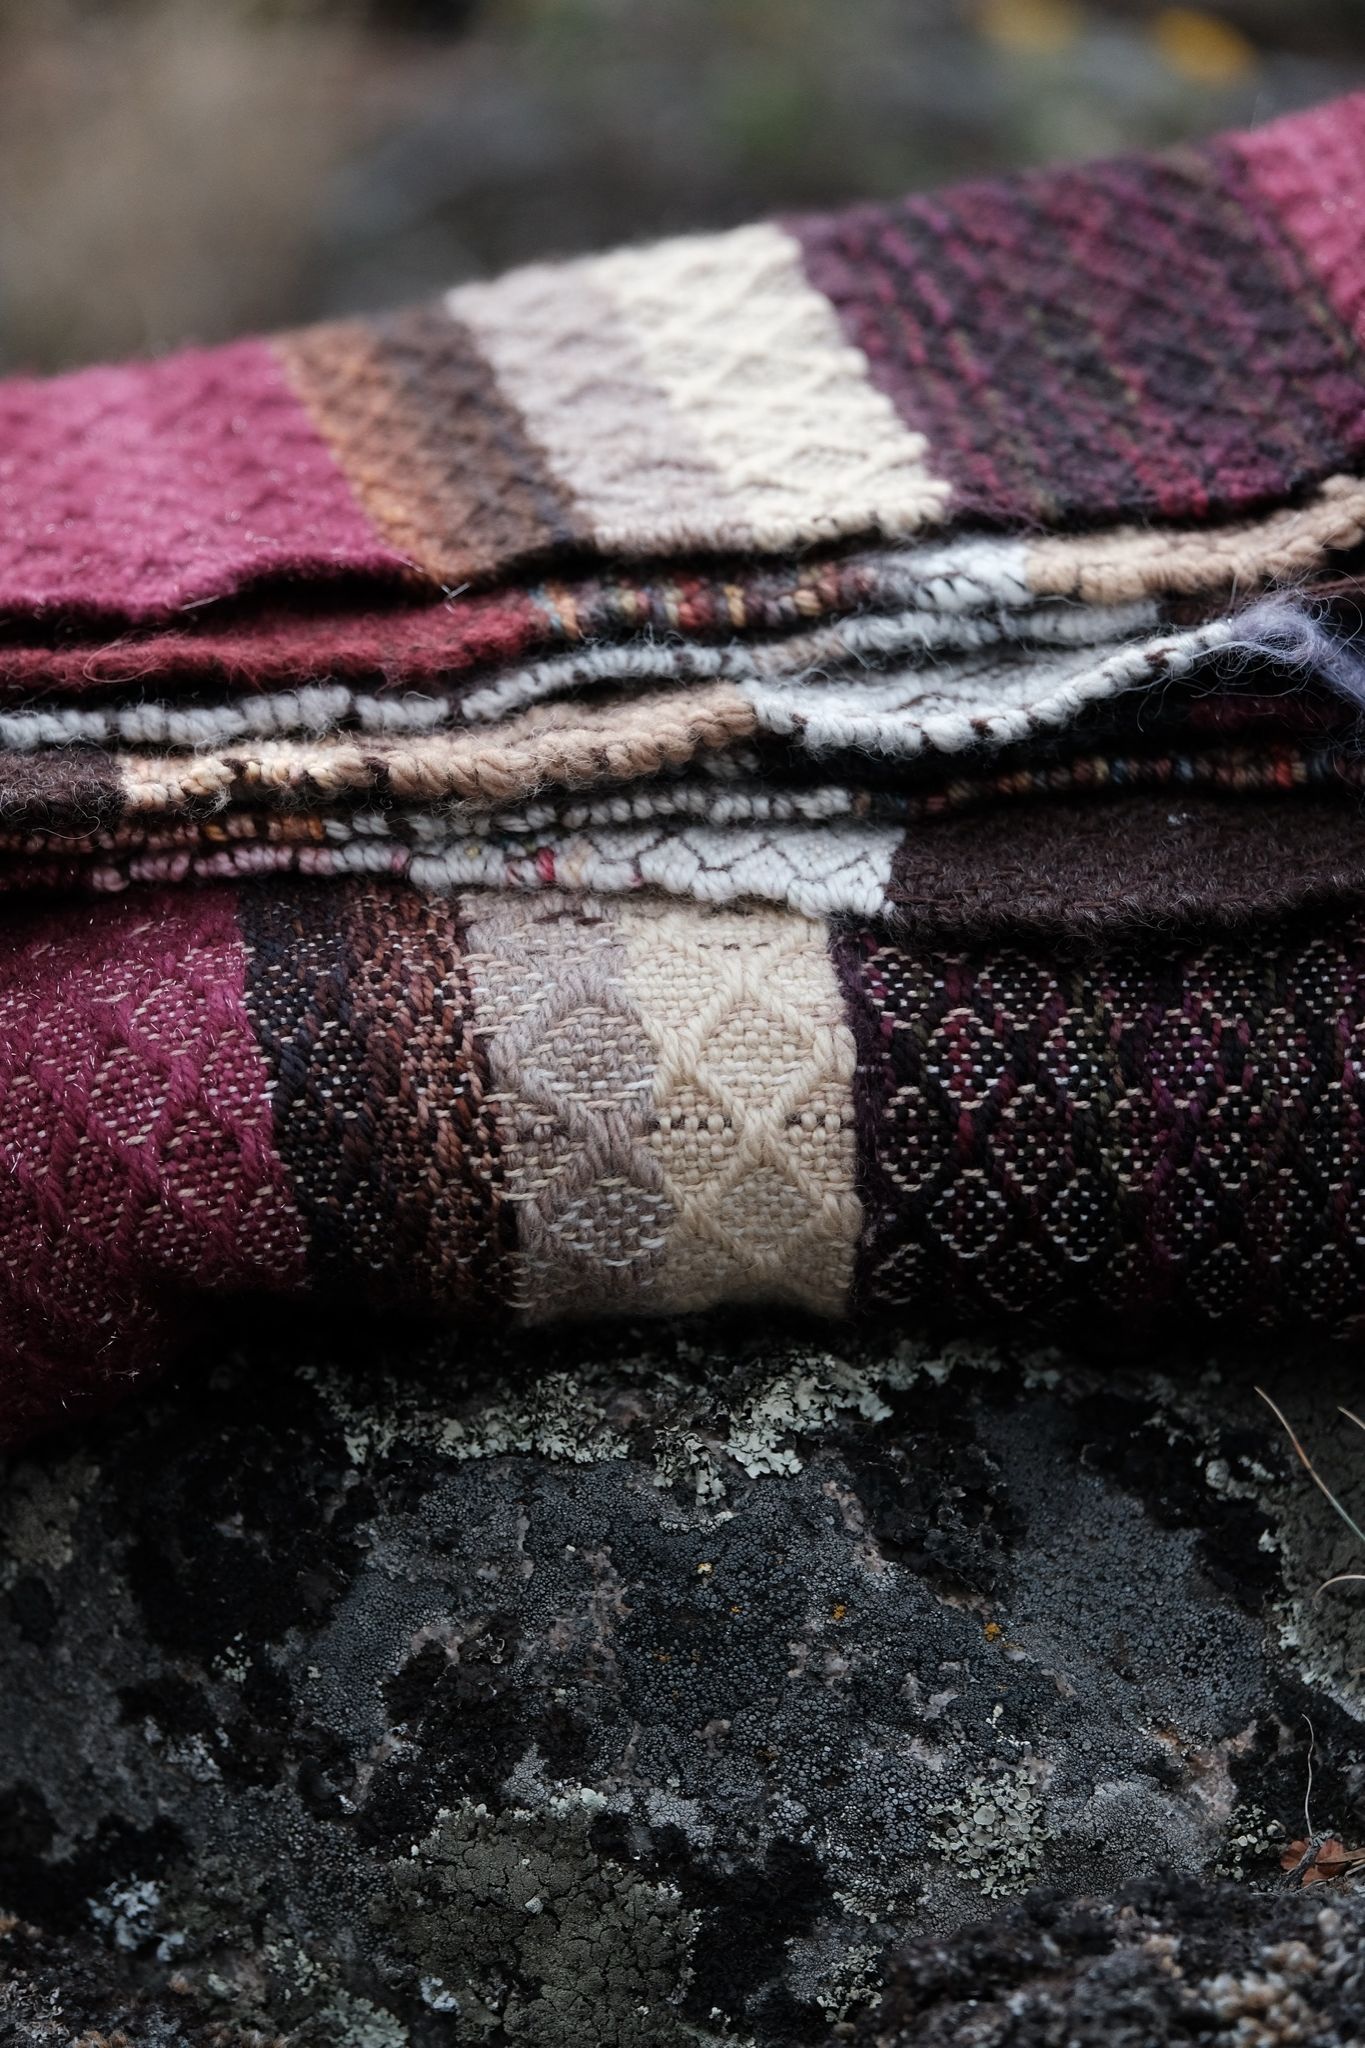 A maroon, black, purple, tan and white handwoven diamond pattern blanket lays folded on a lichen covered boulder